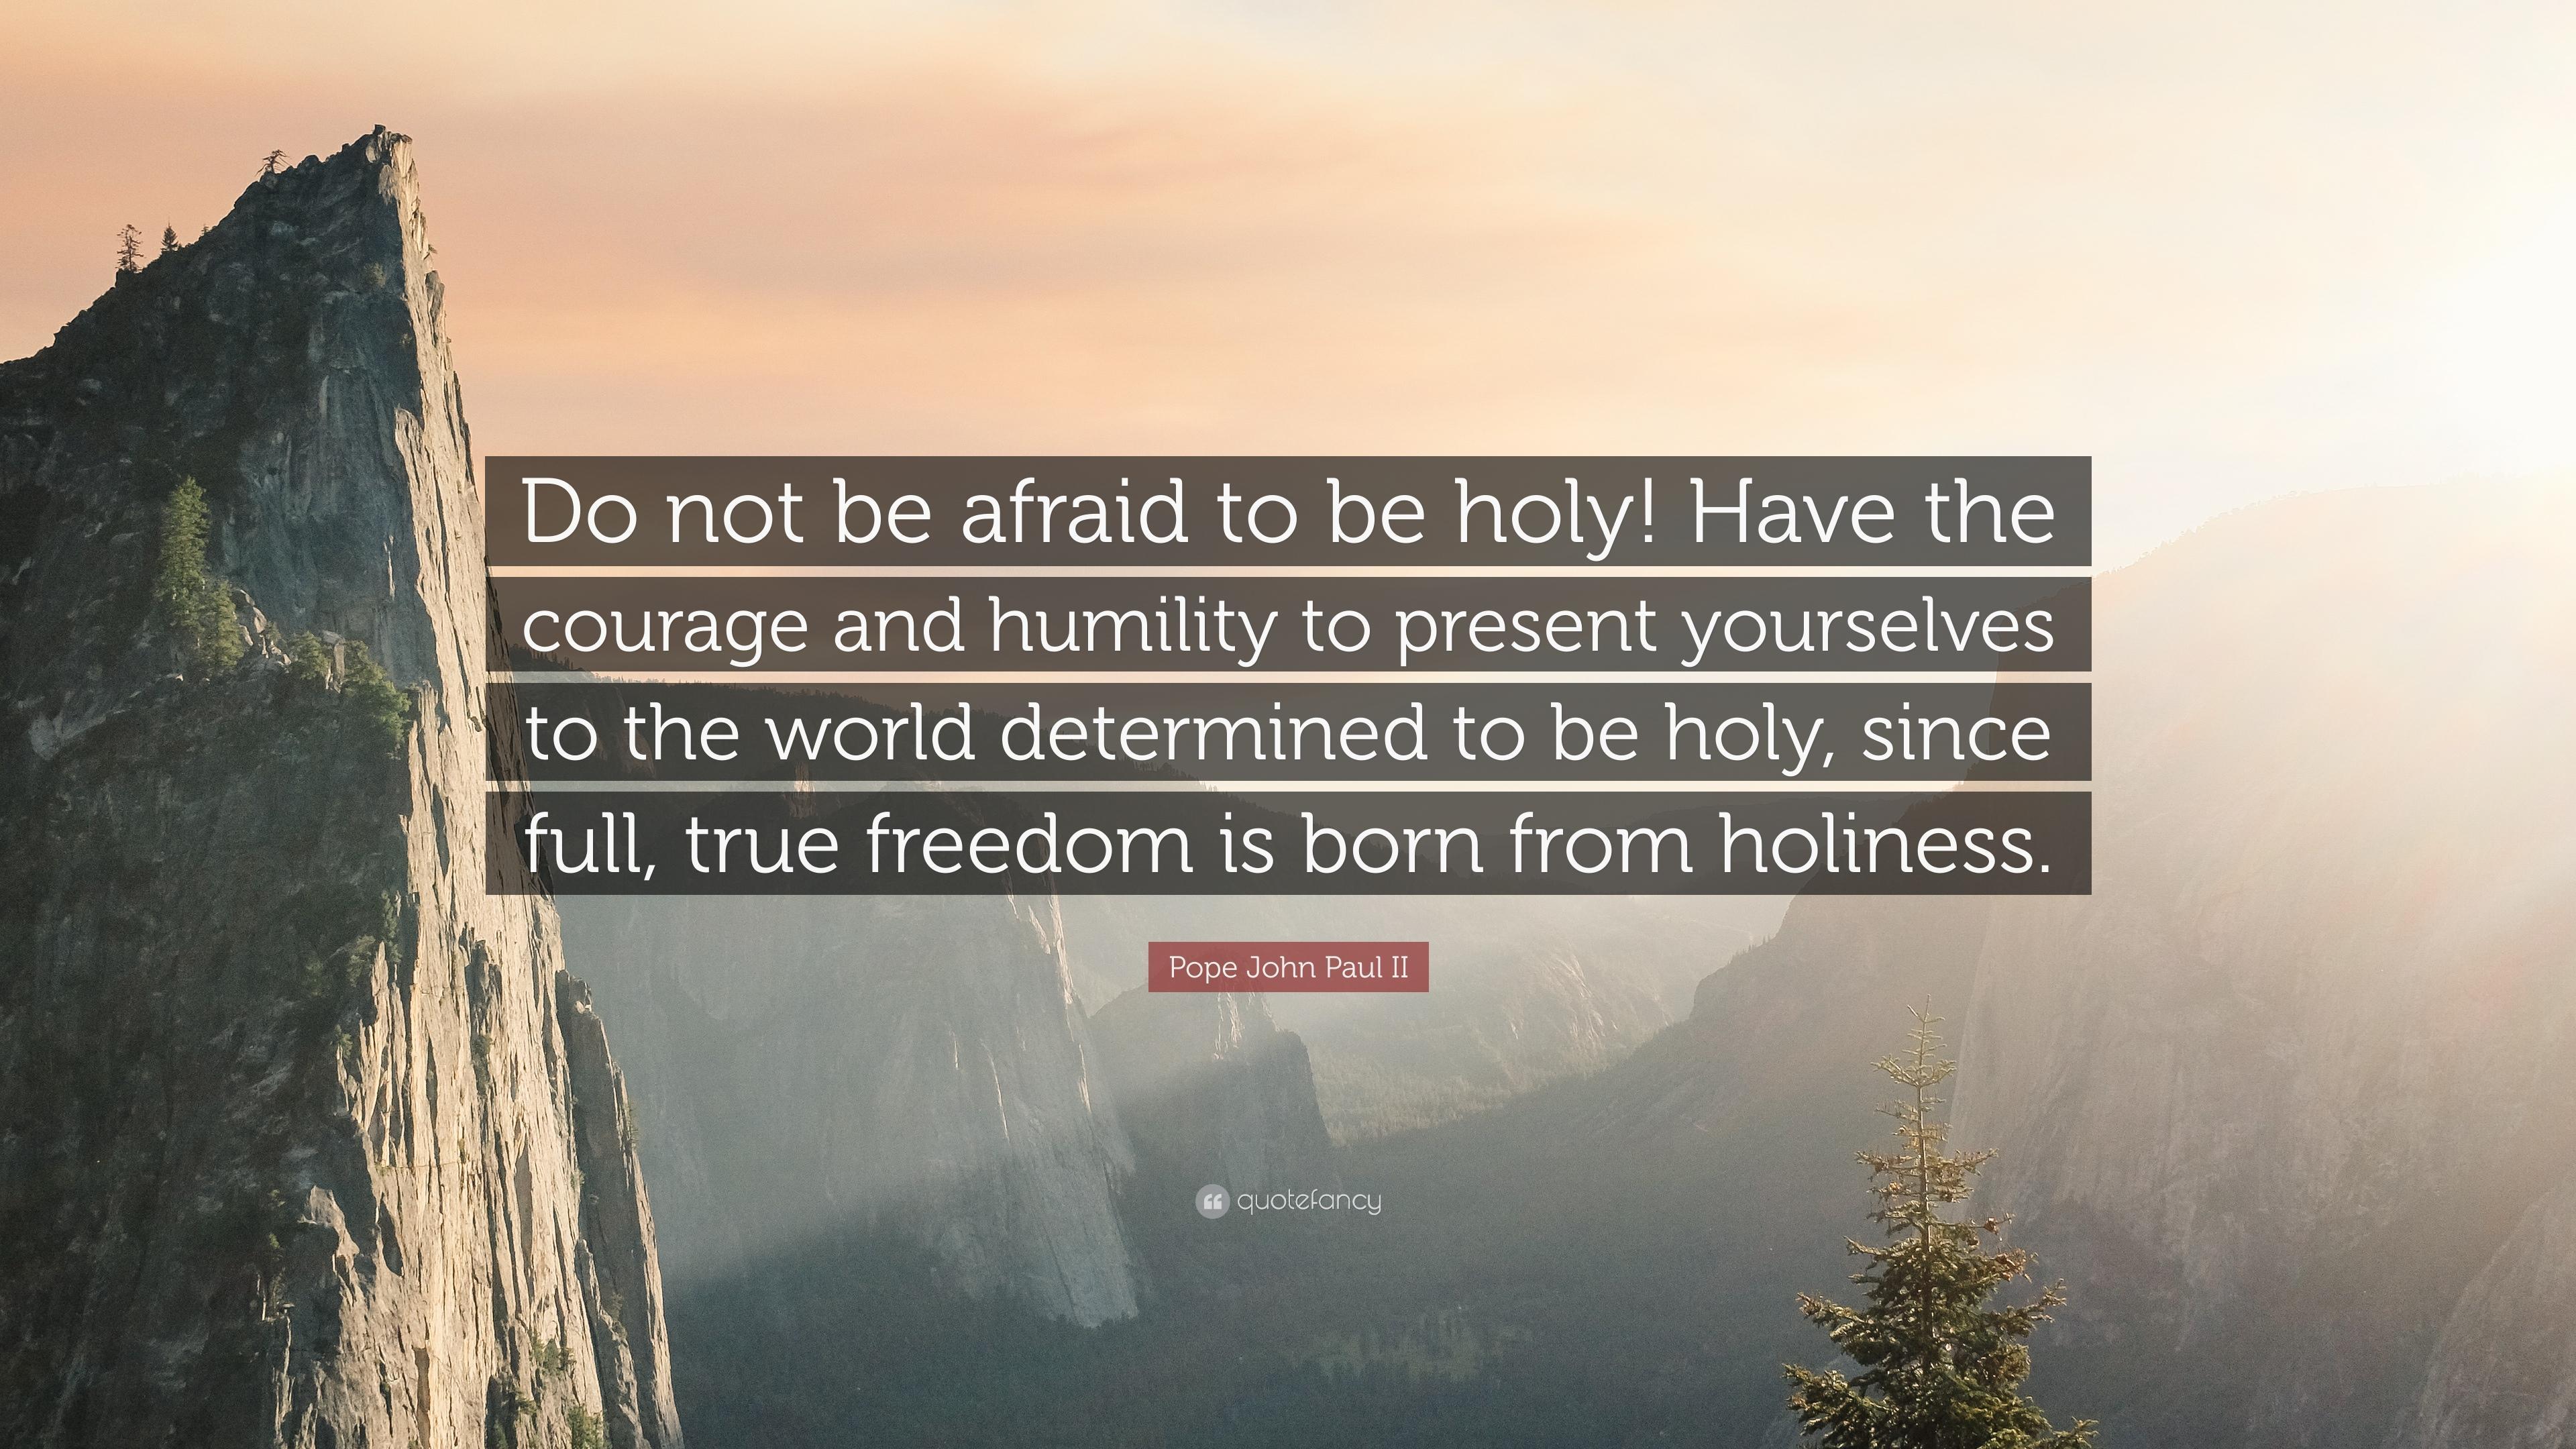 Pope John Paul II Quote: “Do not be afraid to be holy! Have